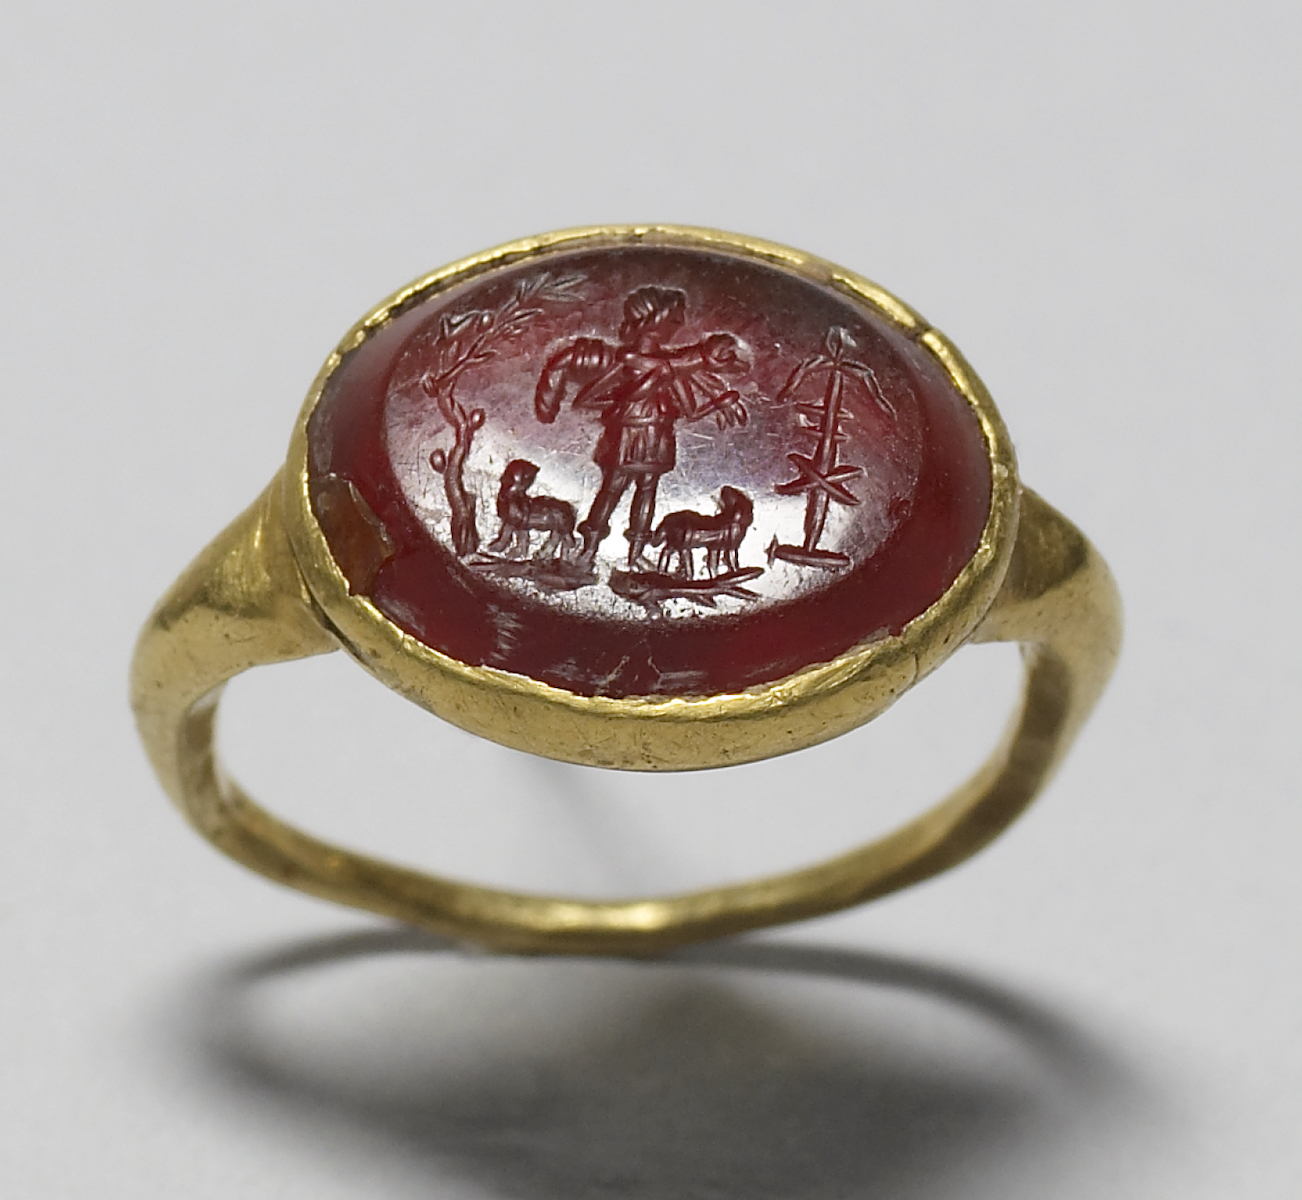 Gold jewelry ring set with oval red gem carved with scene of a young man, wearing tunic, standing on fish, holding sheep over shoulders and flanked by two sheep and a tree with dove and anchor with monogram.